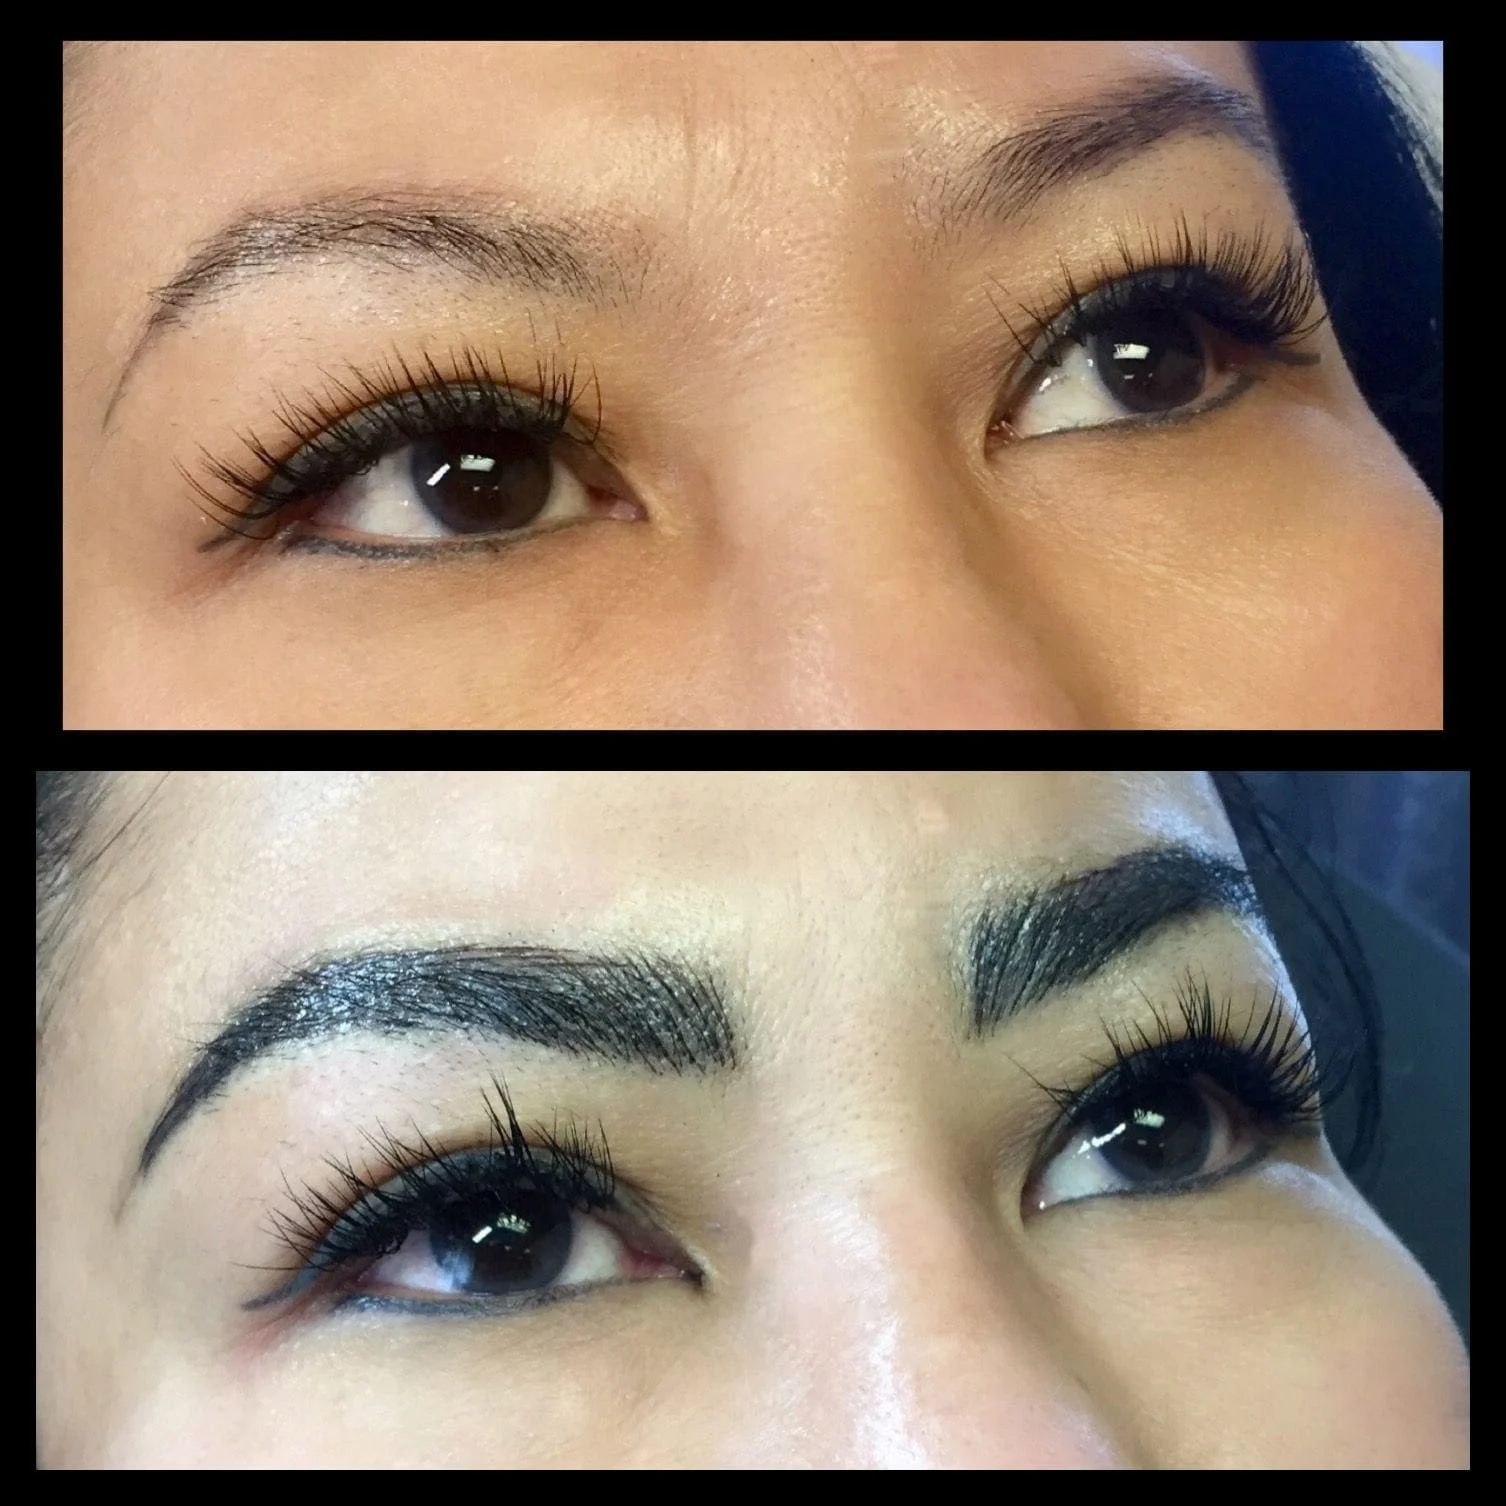 Coverup work done w/ Microblading